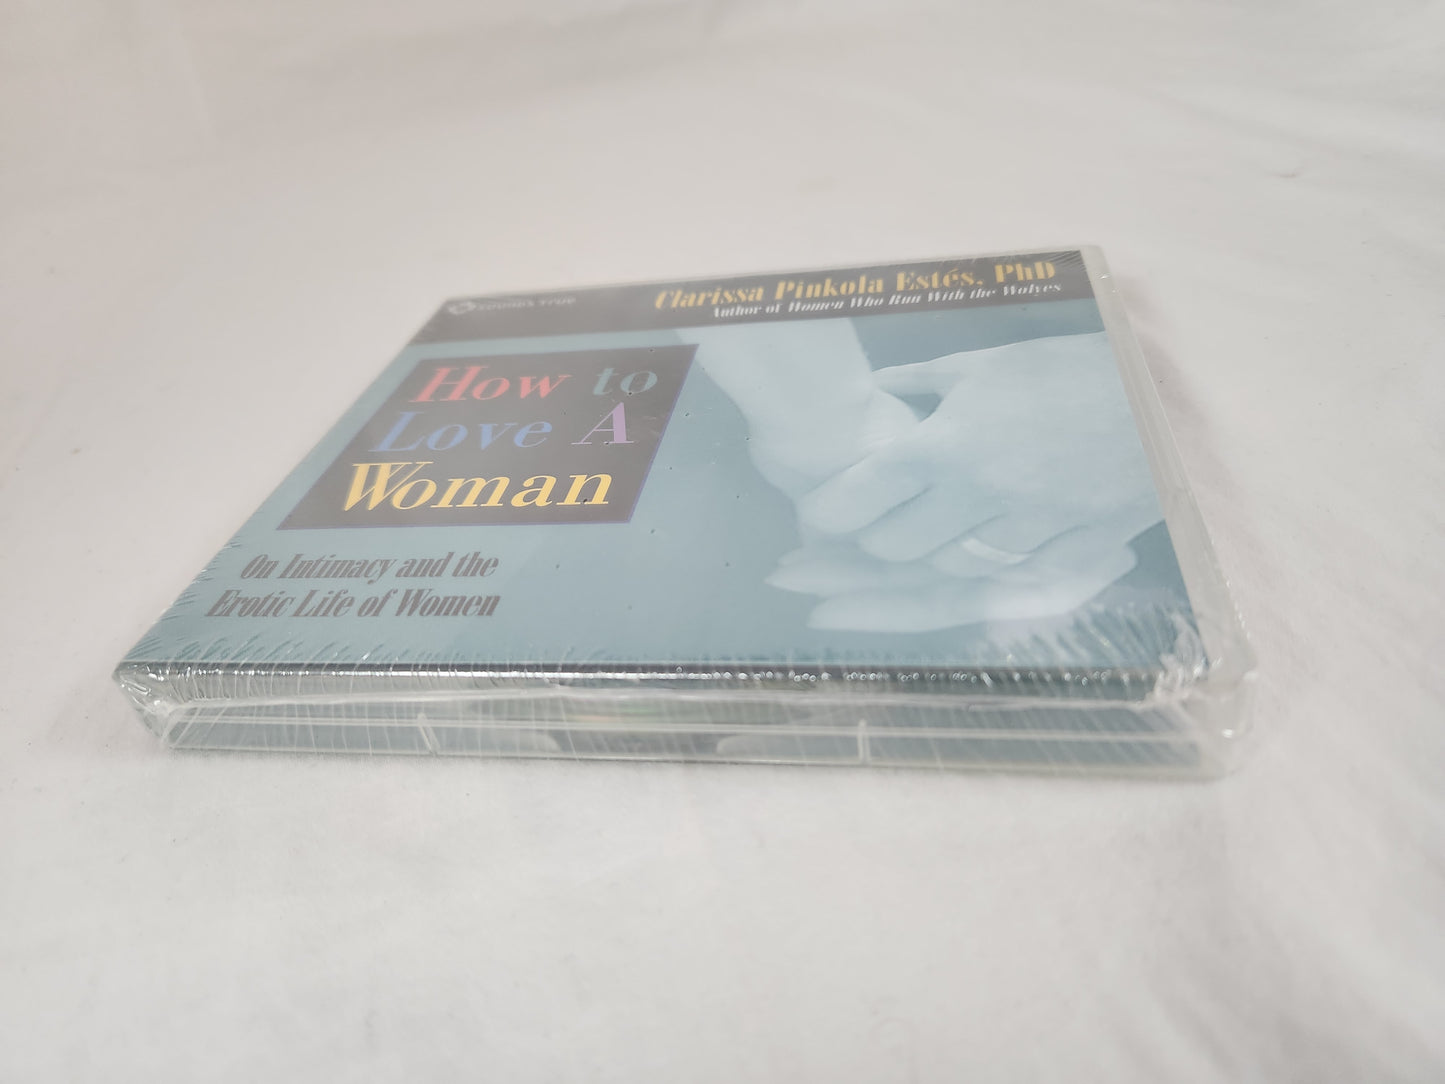 How to Love a Woman by Clarissa Pinkola Estes, PHD (Learning CD)